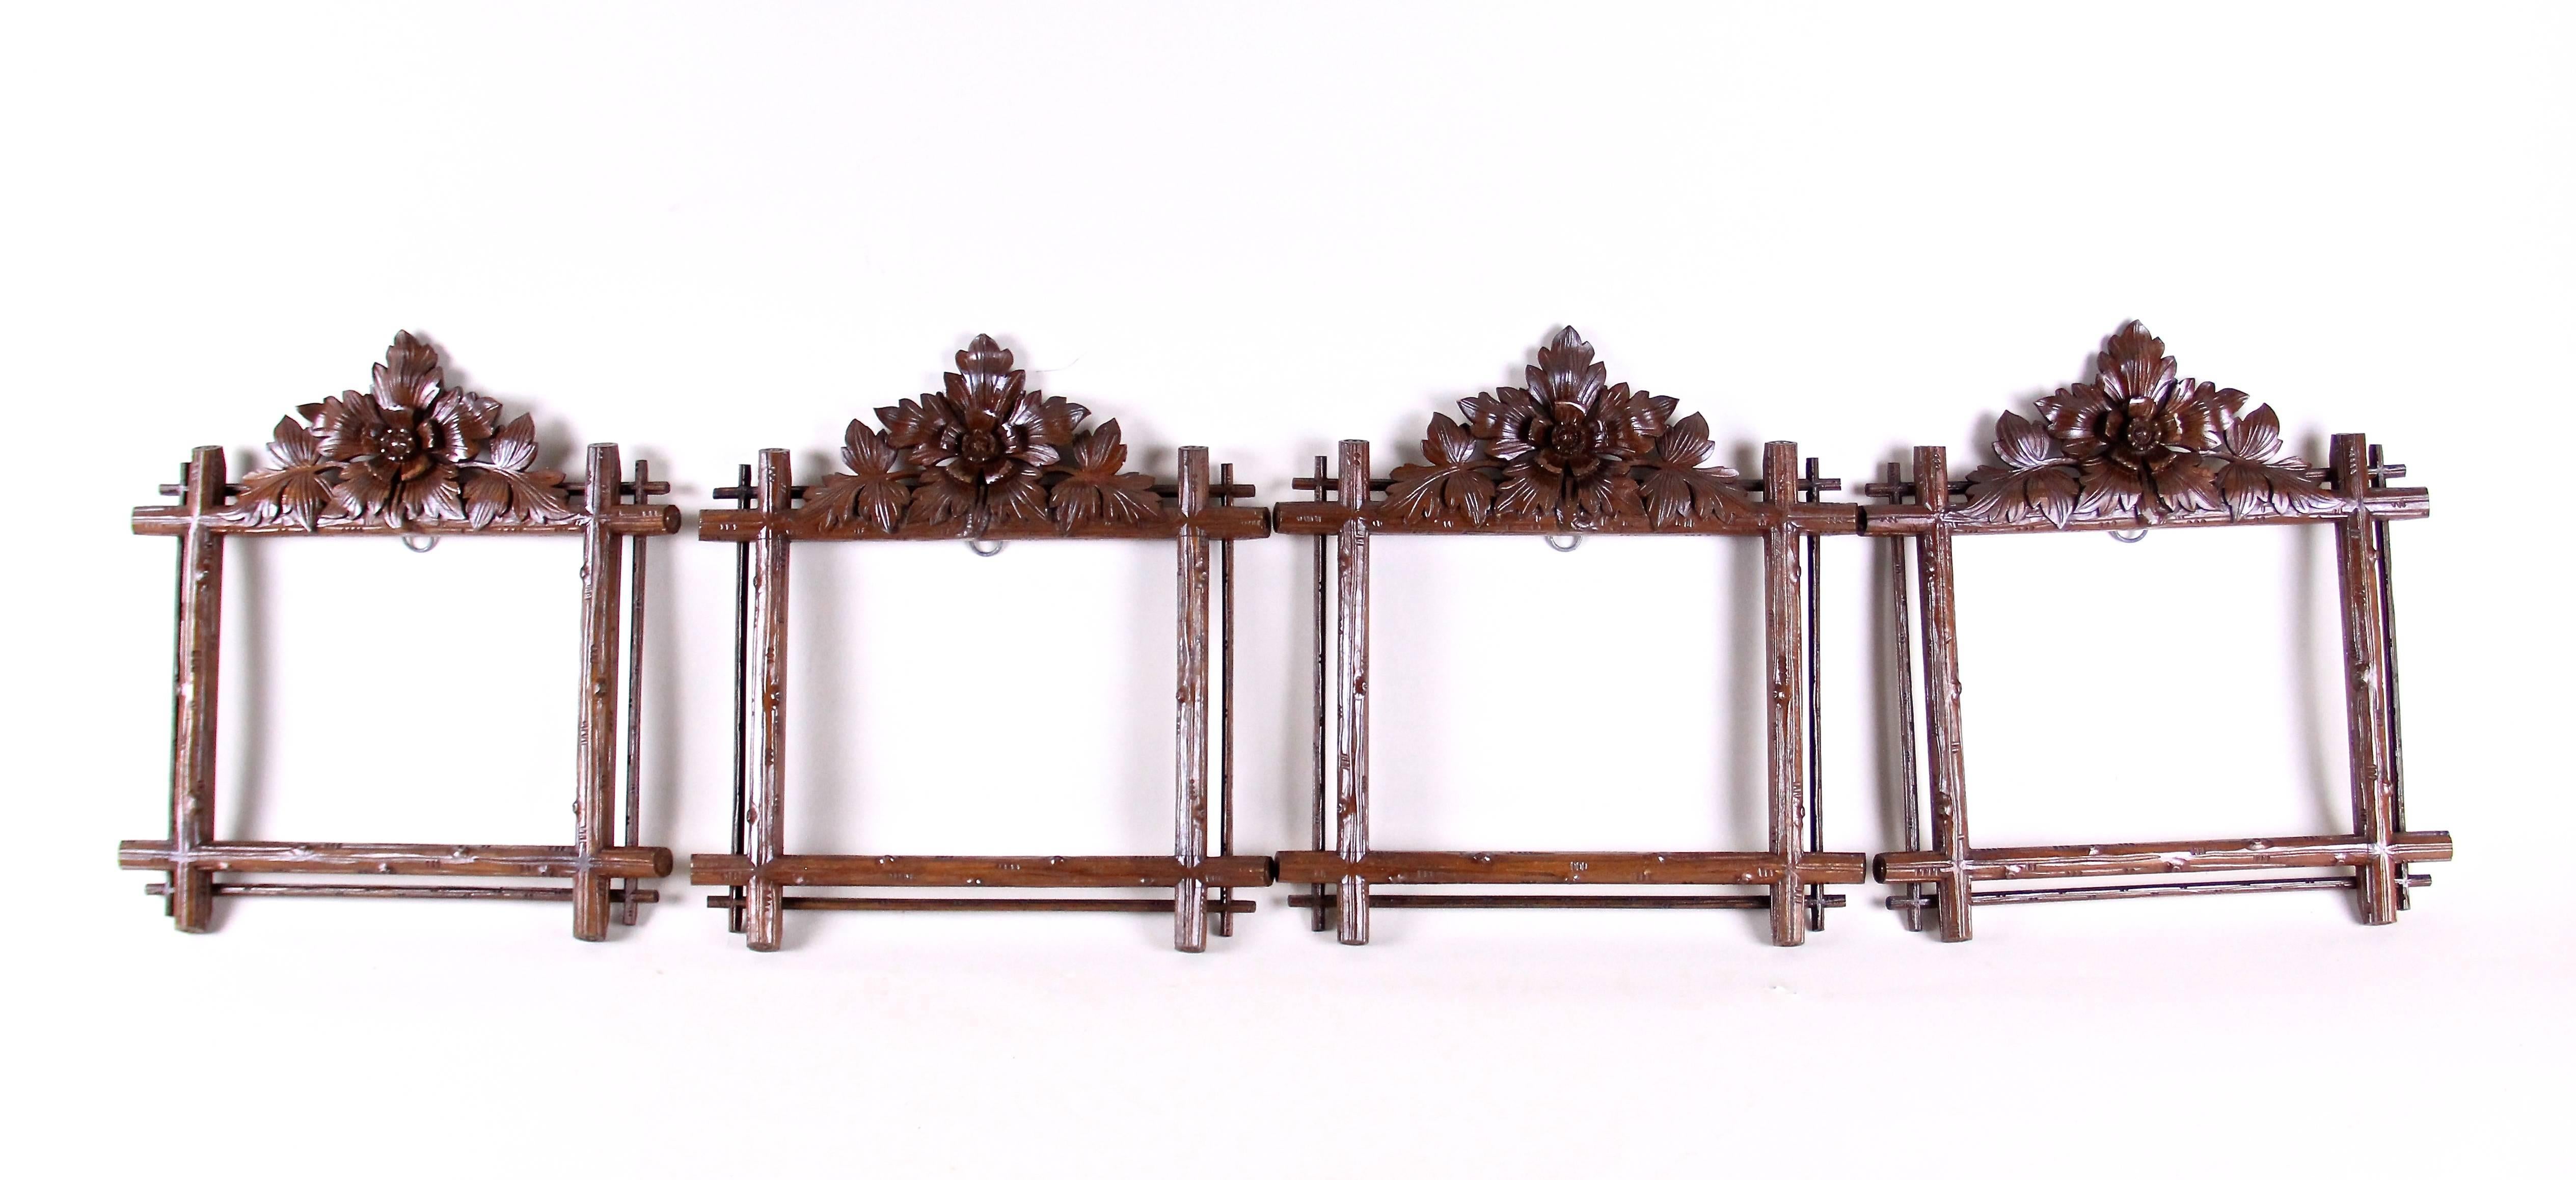 Spectacular Black Forest picture frame set of four from the late 19th century in Austria. Impressing with a fantastic looking hand-carved design, these unique frames shows delicate tree-branch style carved bars surrounded by four narrow bars. The